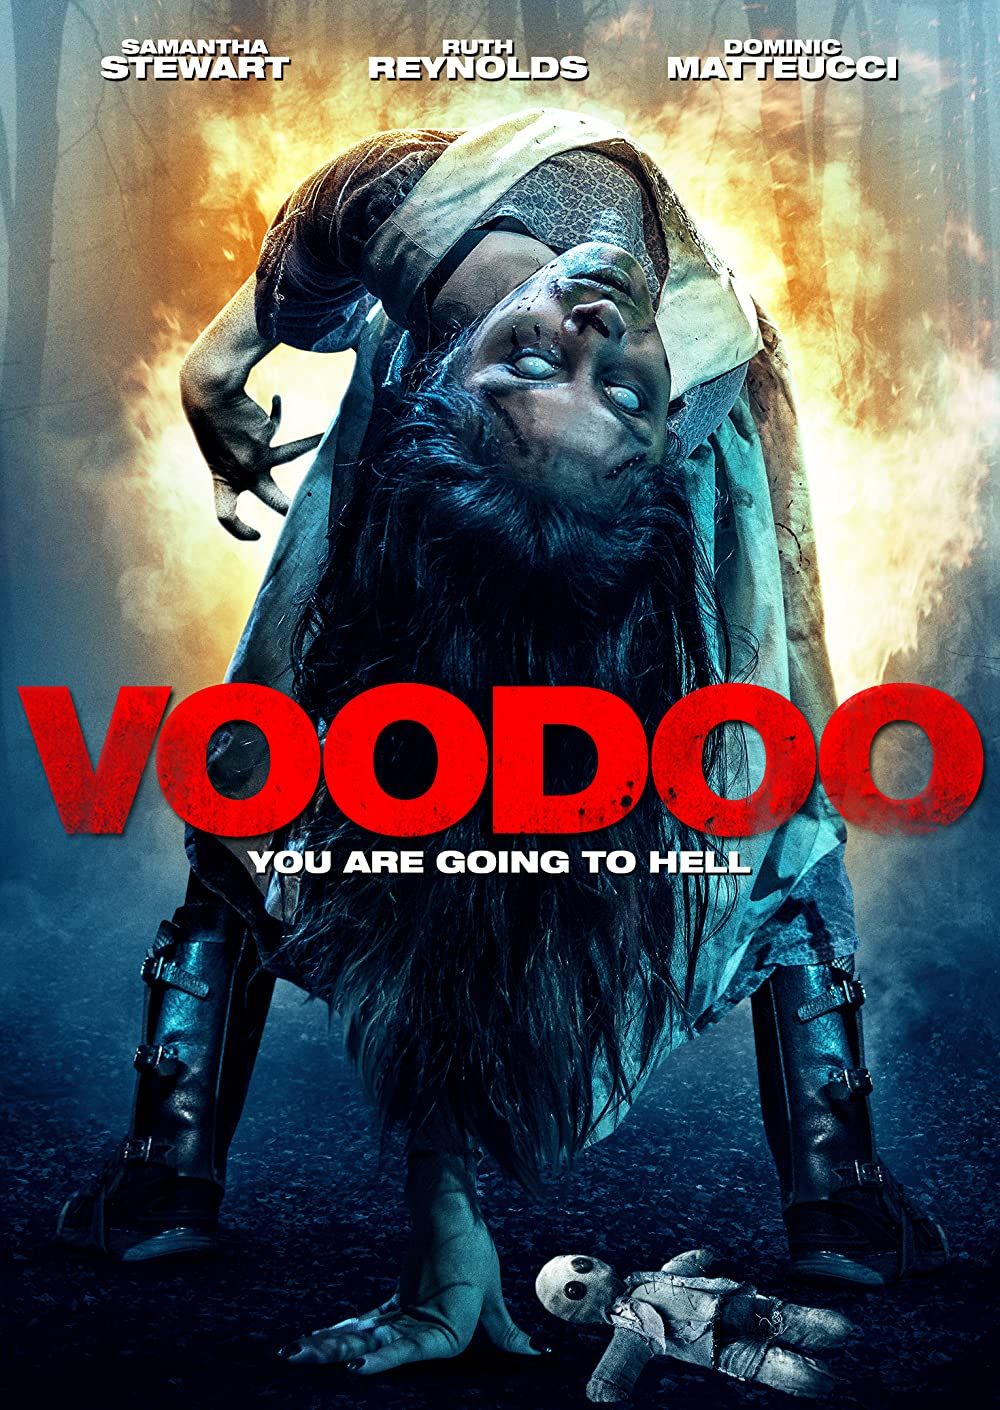 [18+] VooDoo (2017) UNRATED Hindi Dubbed BluRay download full movie